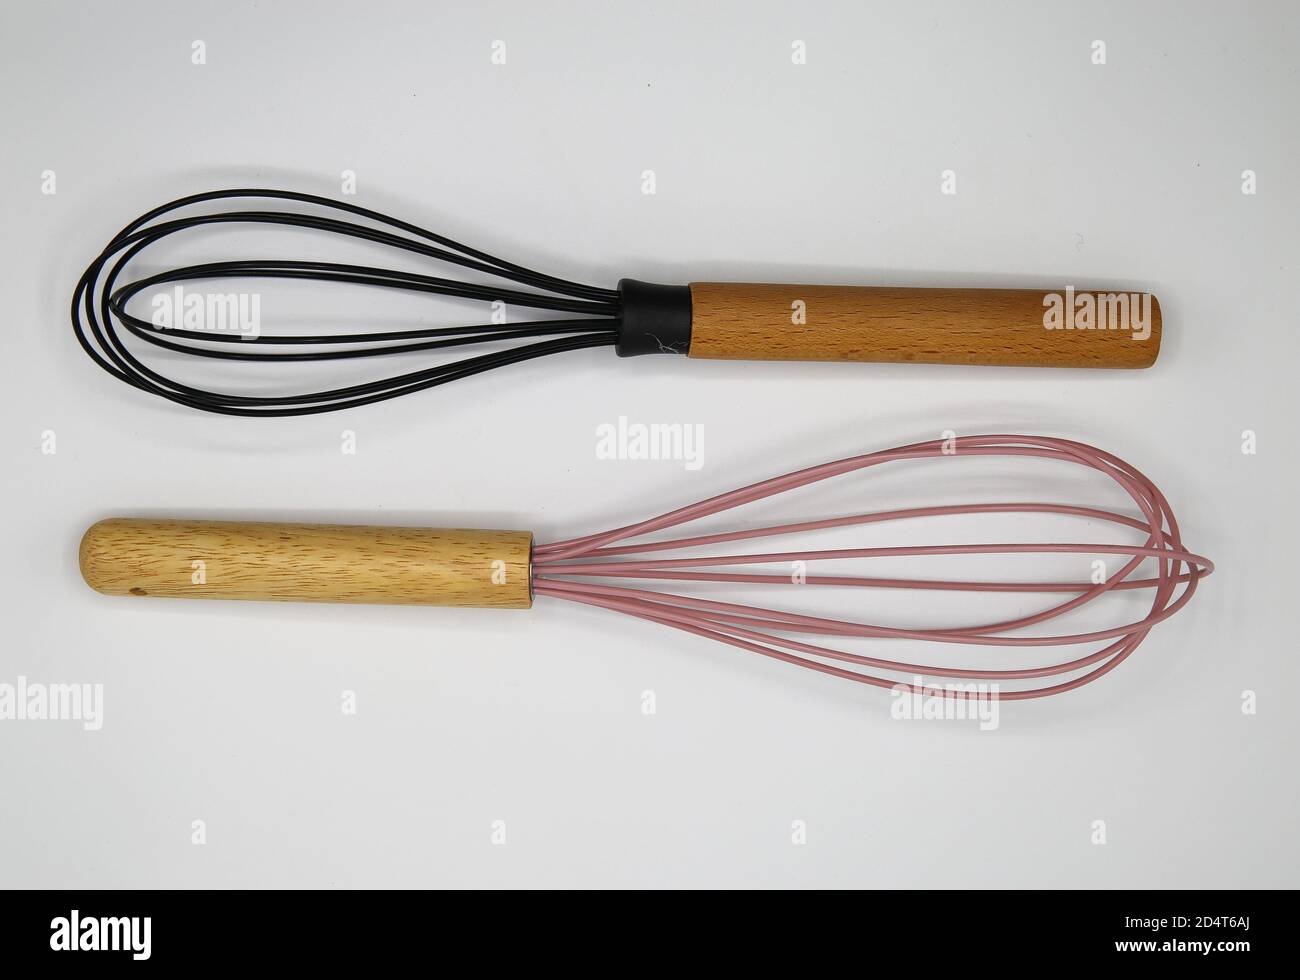 Olive Wood And Stainless Steel Whisk By World Market